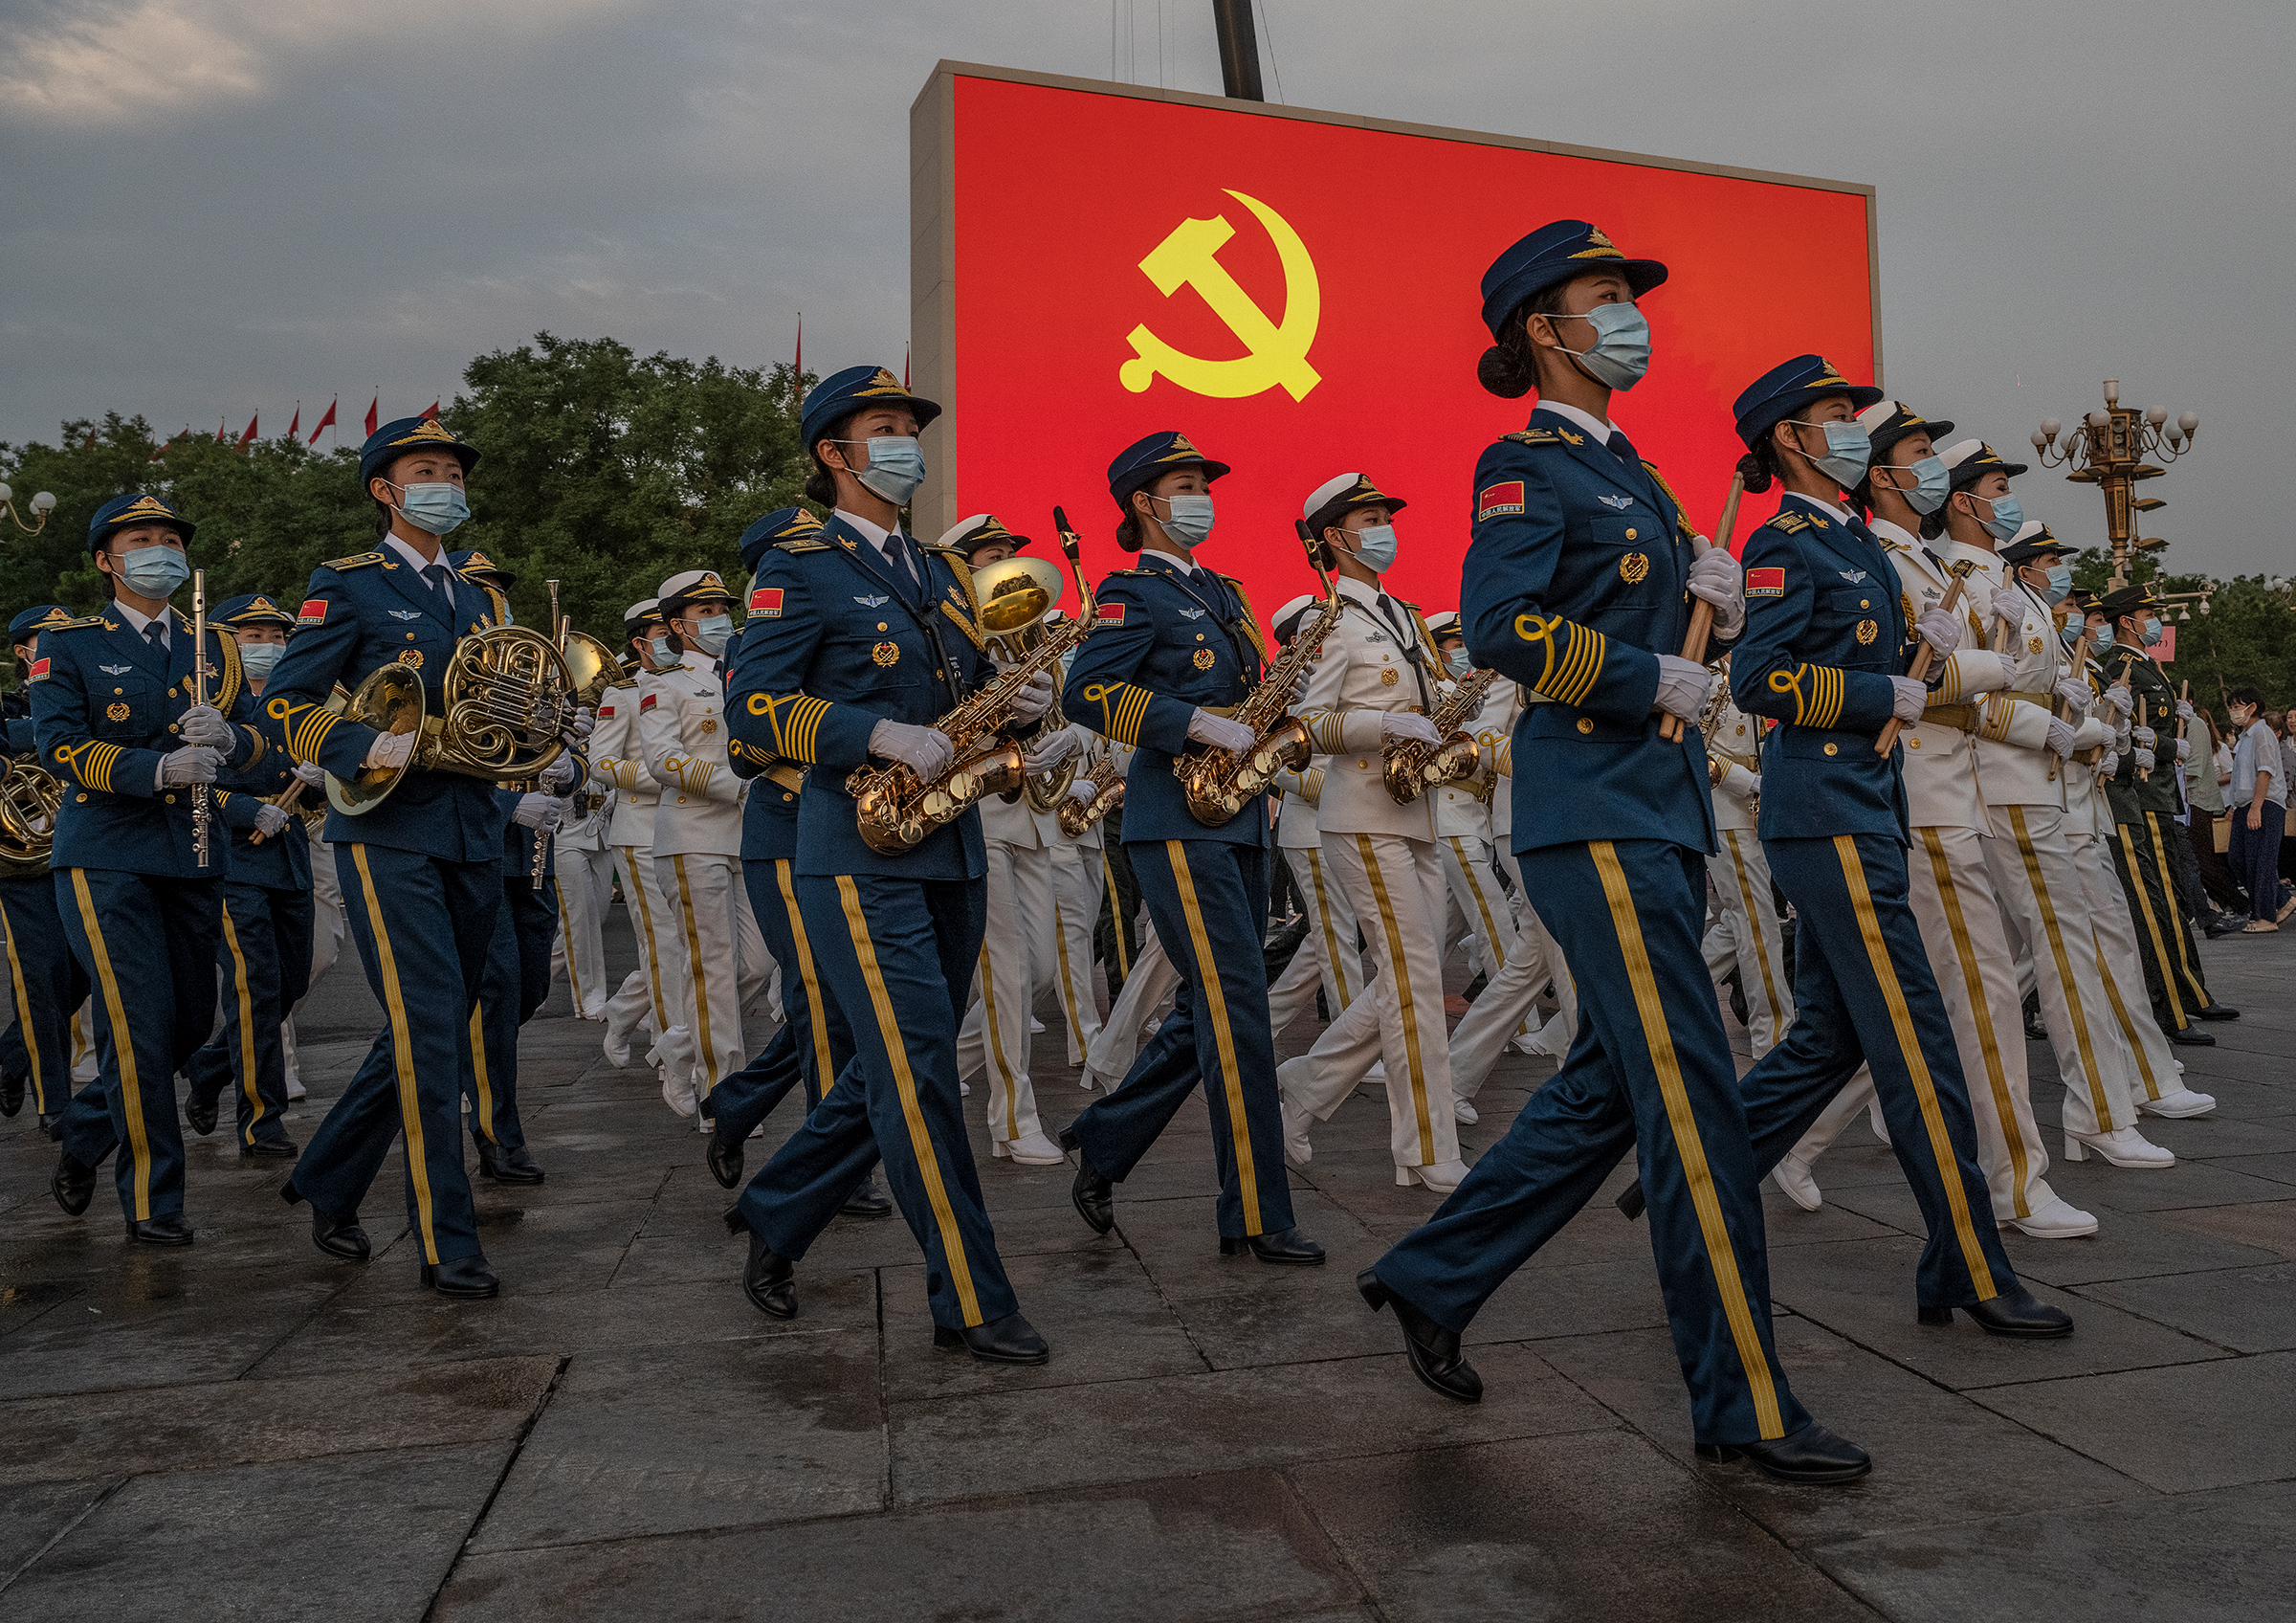 Female members of a People's Liberation Army ceremonial band march at a ceremony marking the 100th anniversary of the Chinese Communist Party in Beijing's Tiananmen Square on July 1. (Kevin Frayer—Getty Images)